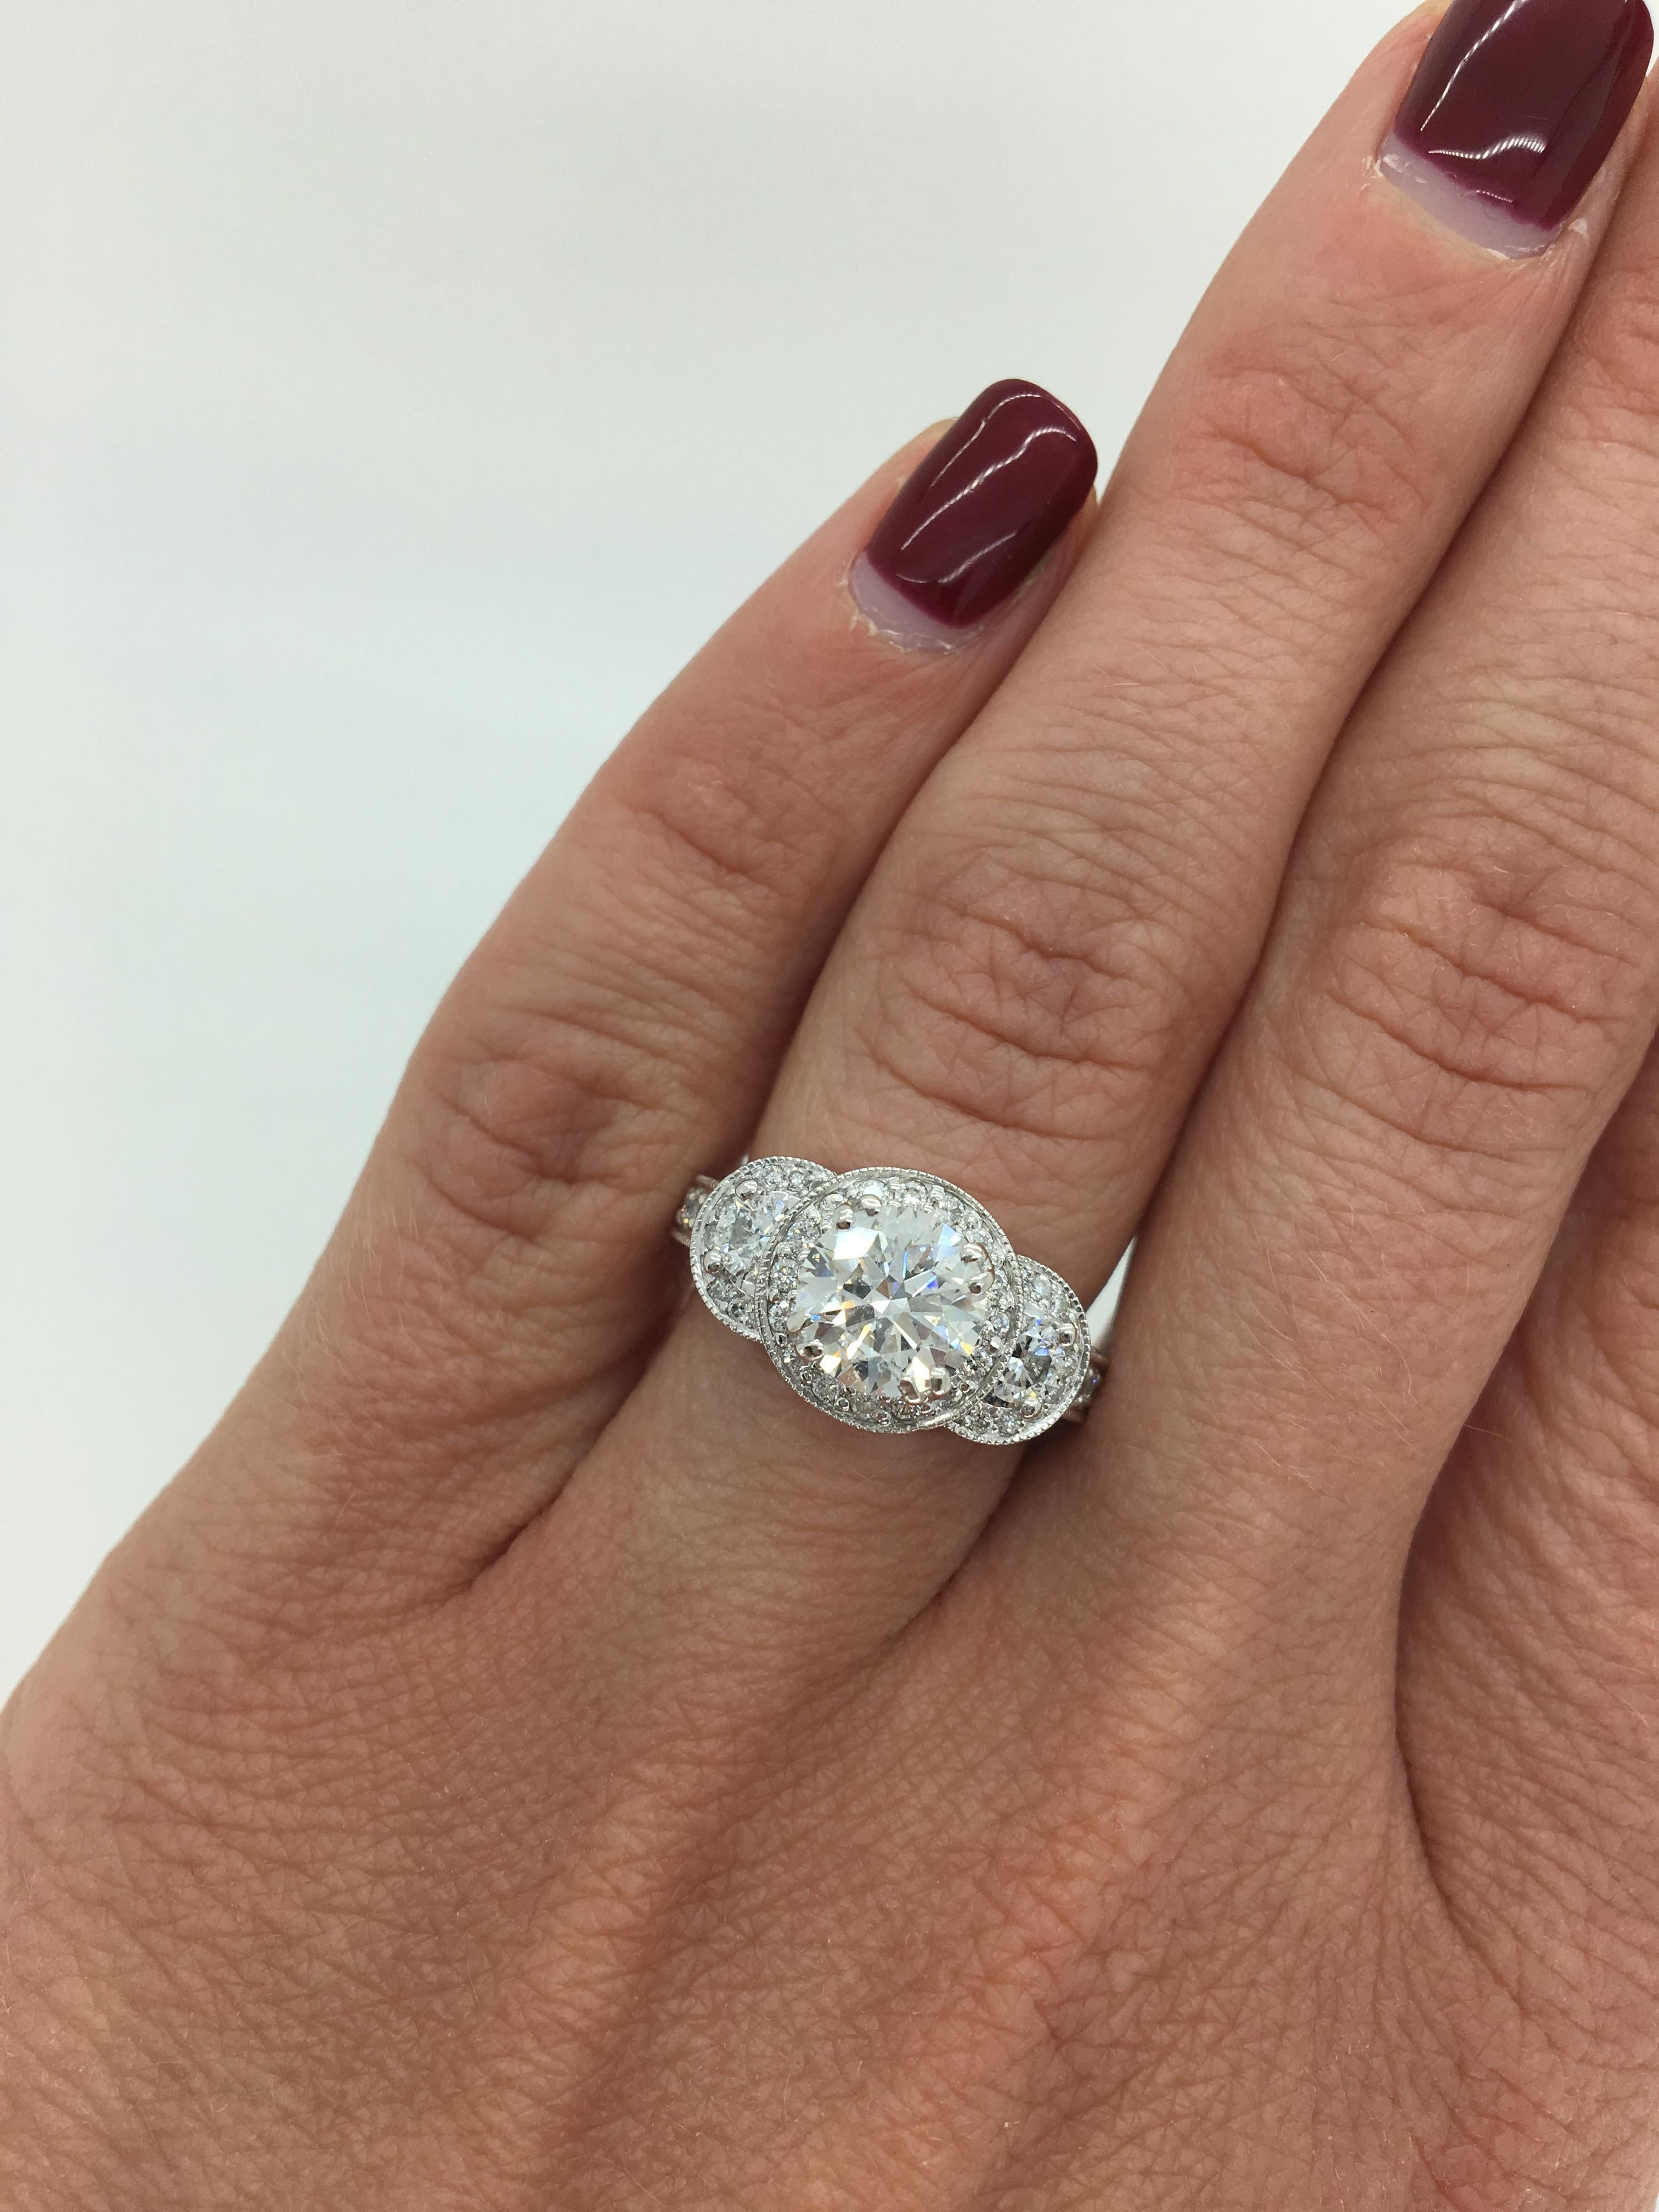 This stunning 18k white gold engagement ring features an EGL Certified 1.33CT Tolkowsky Ideal Round Cut Diamond with F color and SI2 clarity per EGL certificate. Graded to GIA Standards the featured diamond displays G-H color and I1 clarity. There